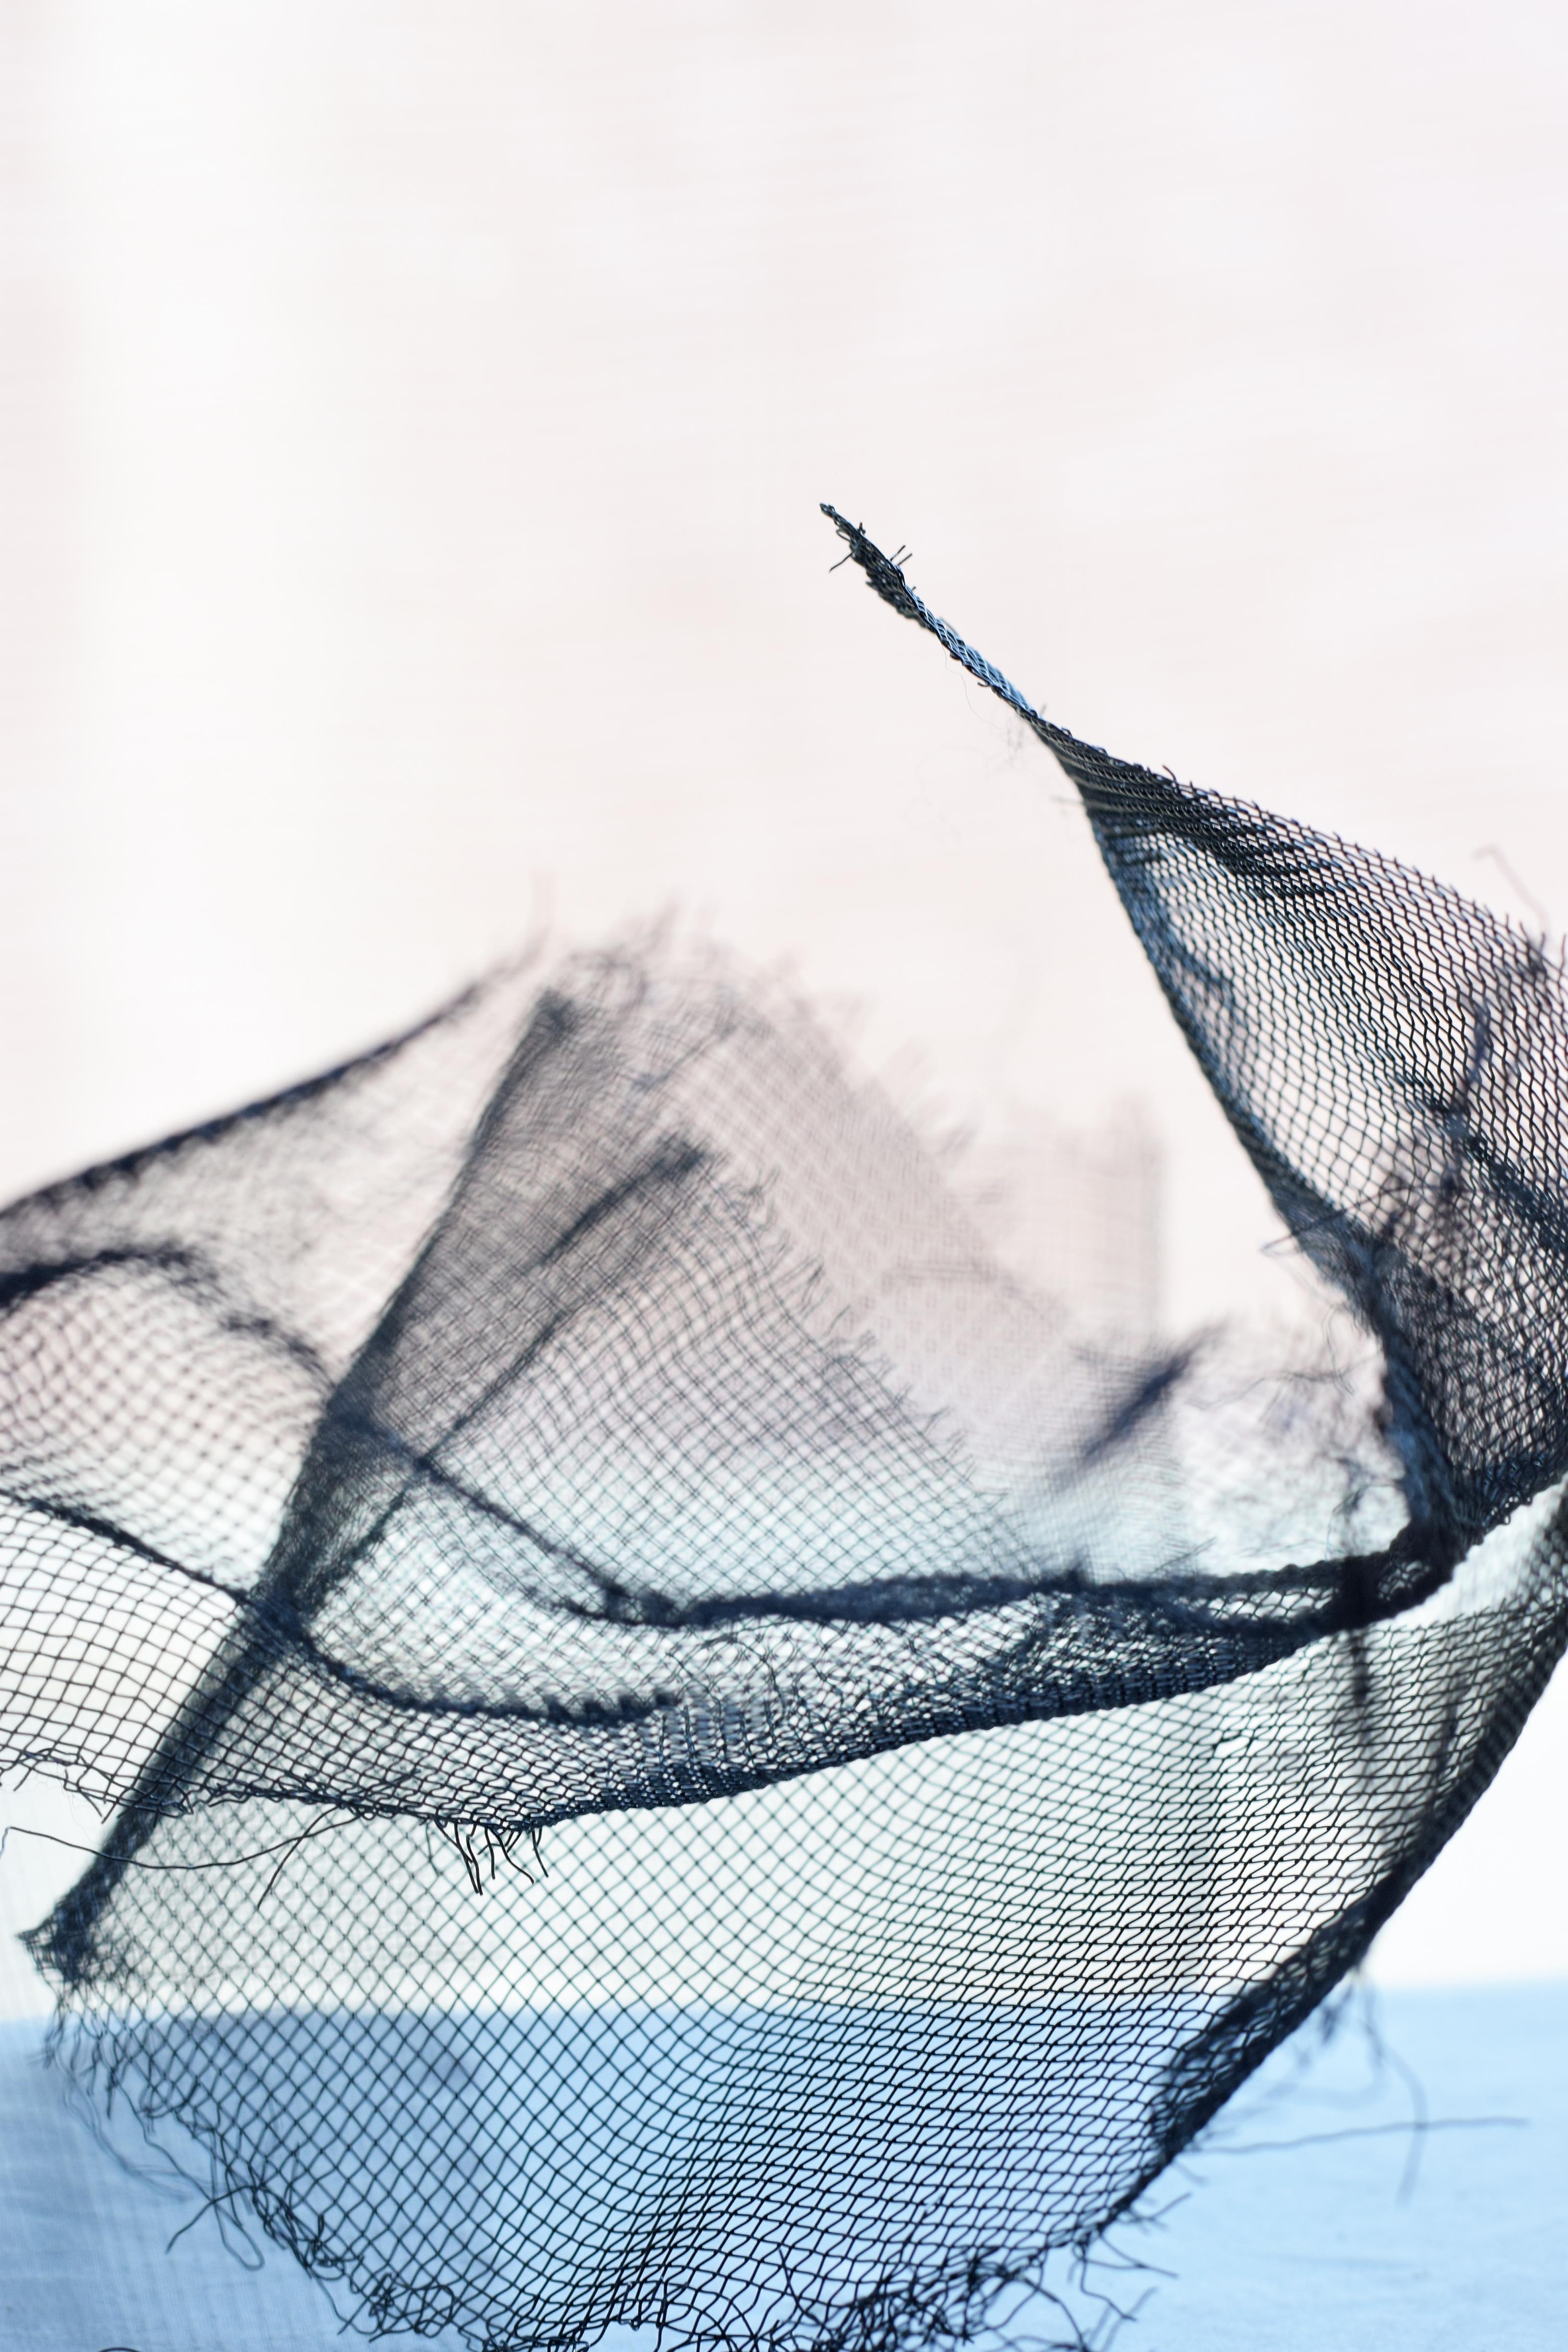 Carleigh Thomas Abstract Photograph - WIRE MESH - Limited Edition Print on Handmade Archival Paper - Black White, Blue